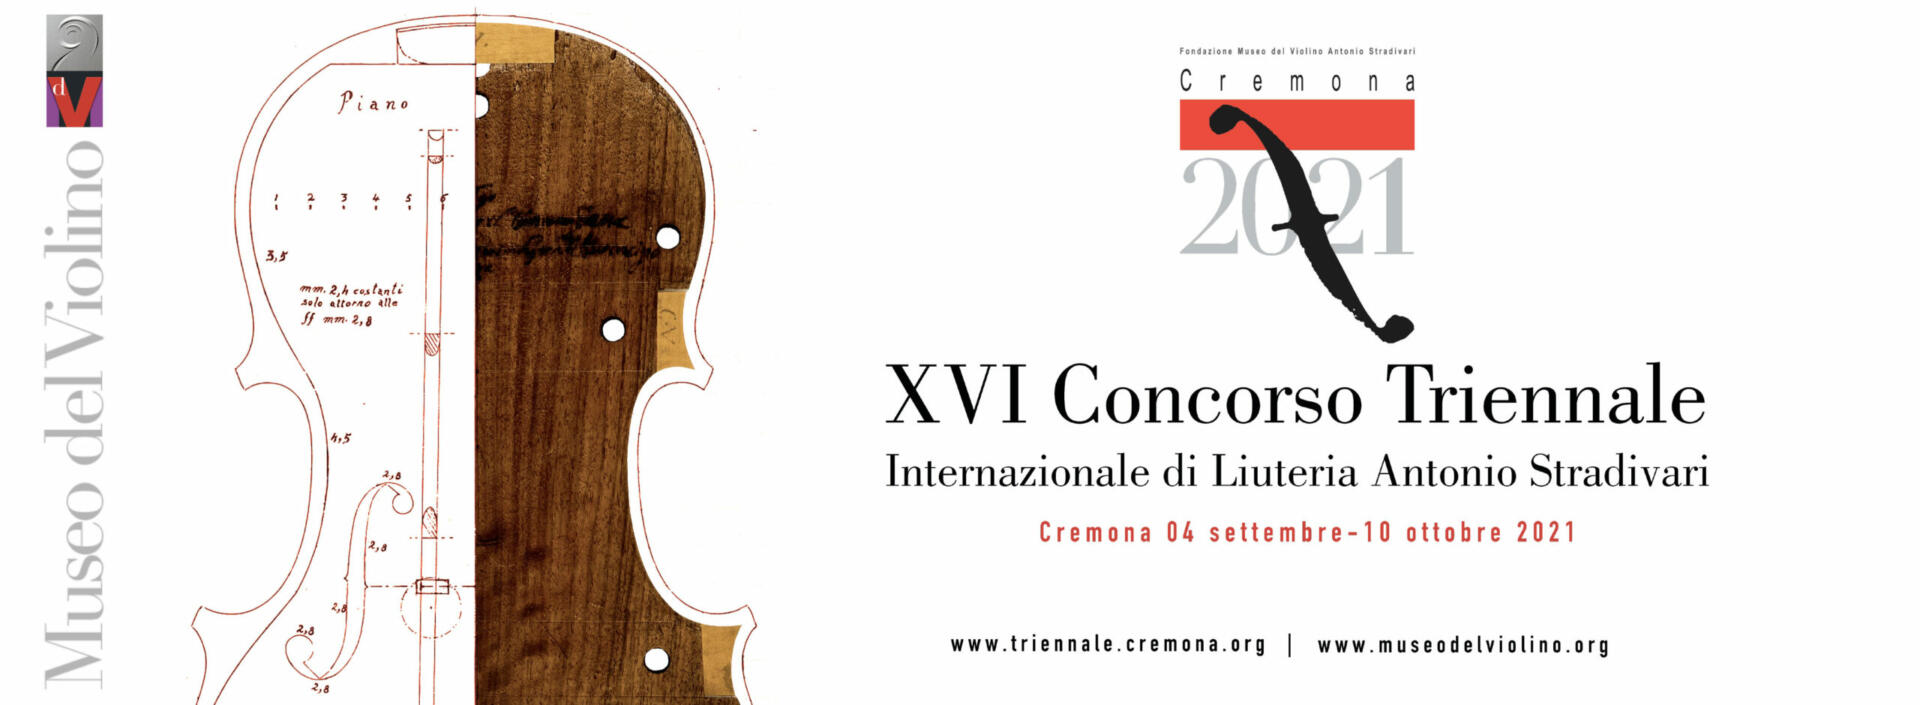 Medals Awarded at the 2021 Cremona Triennale Violin Making Competition - image attachment